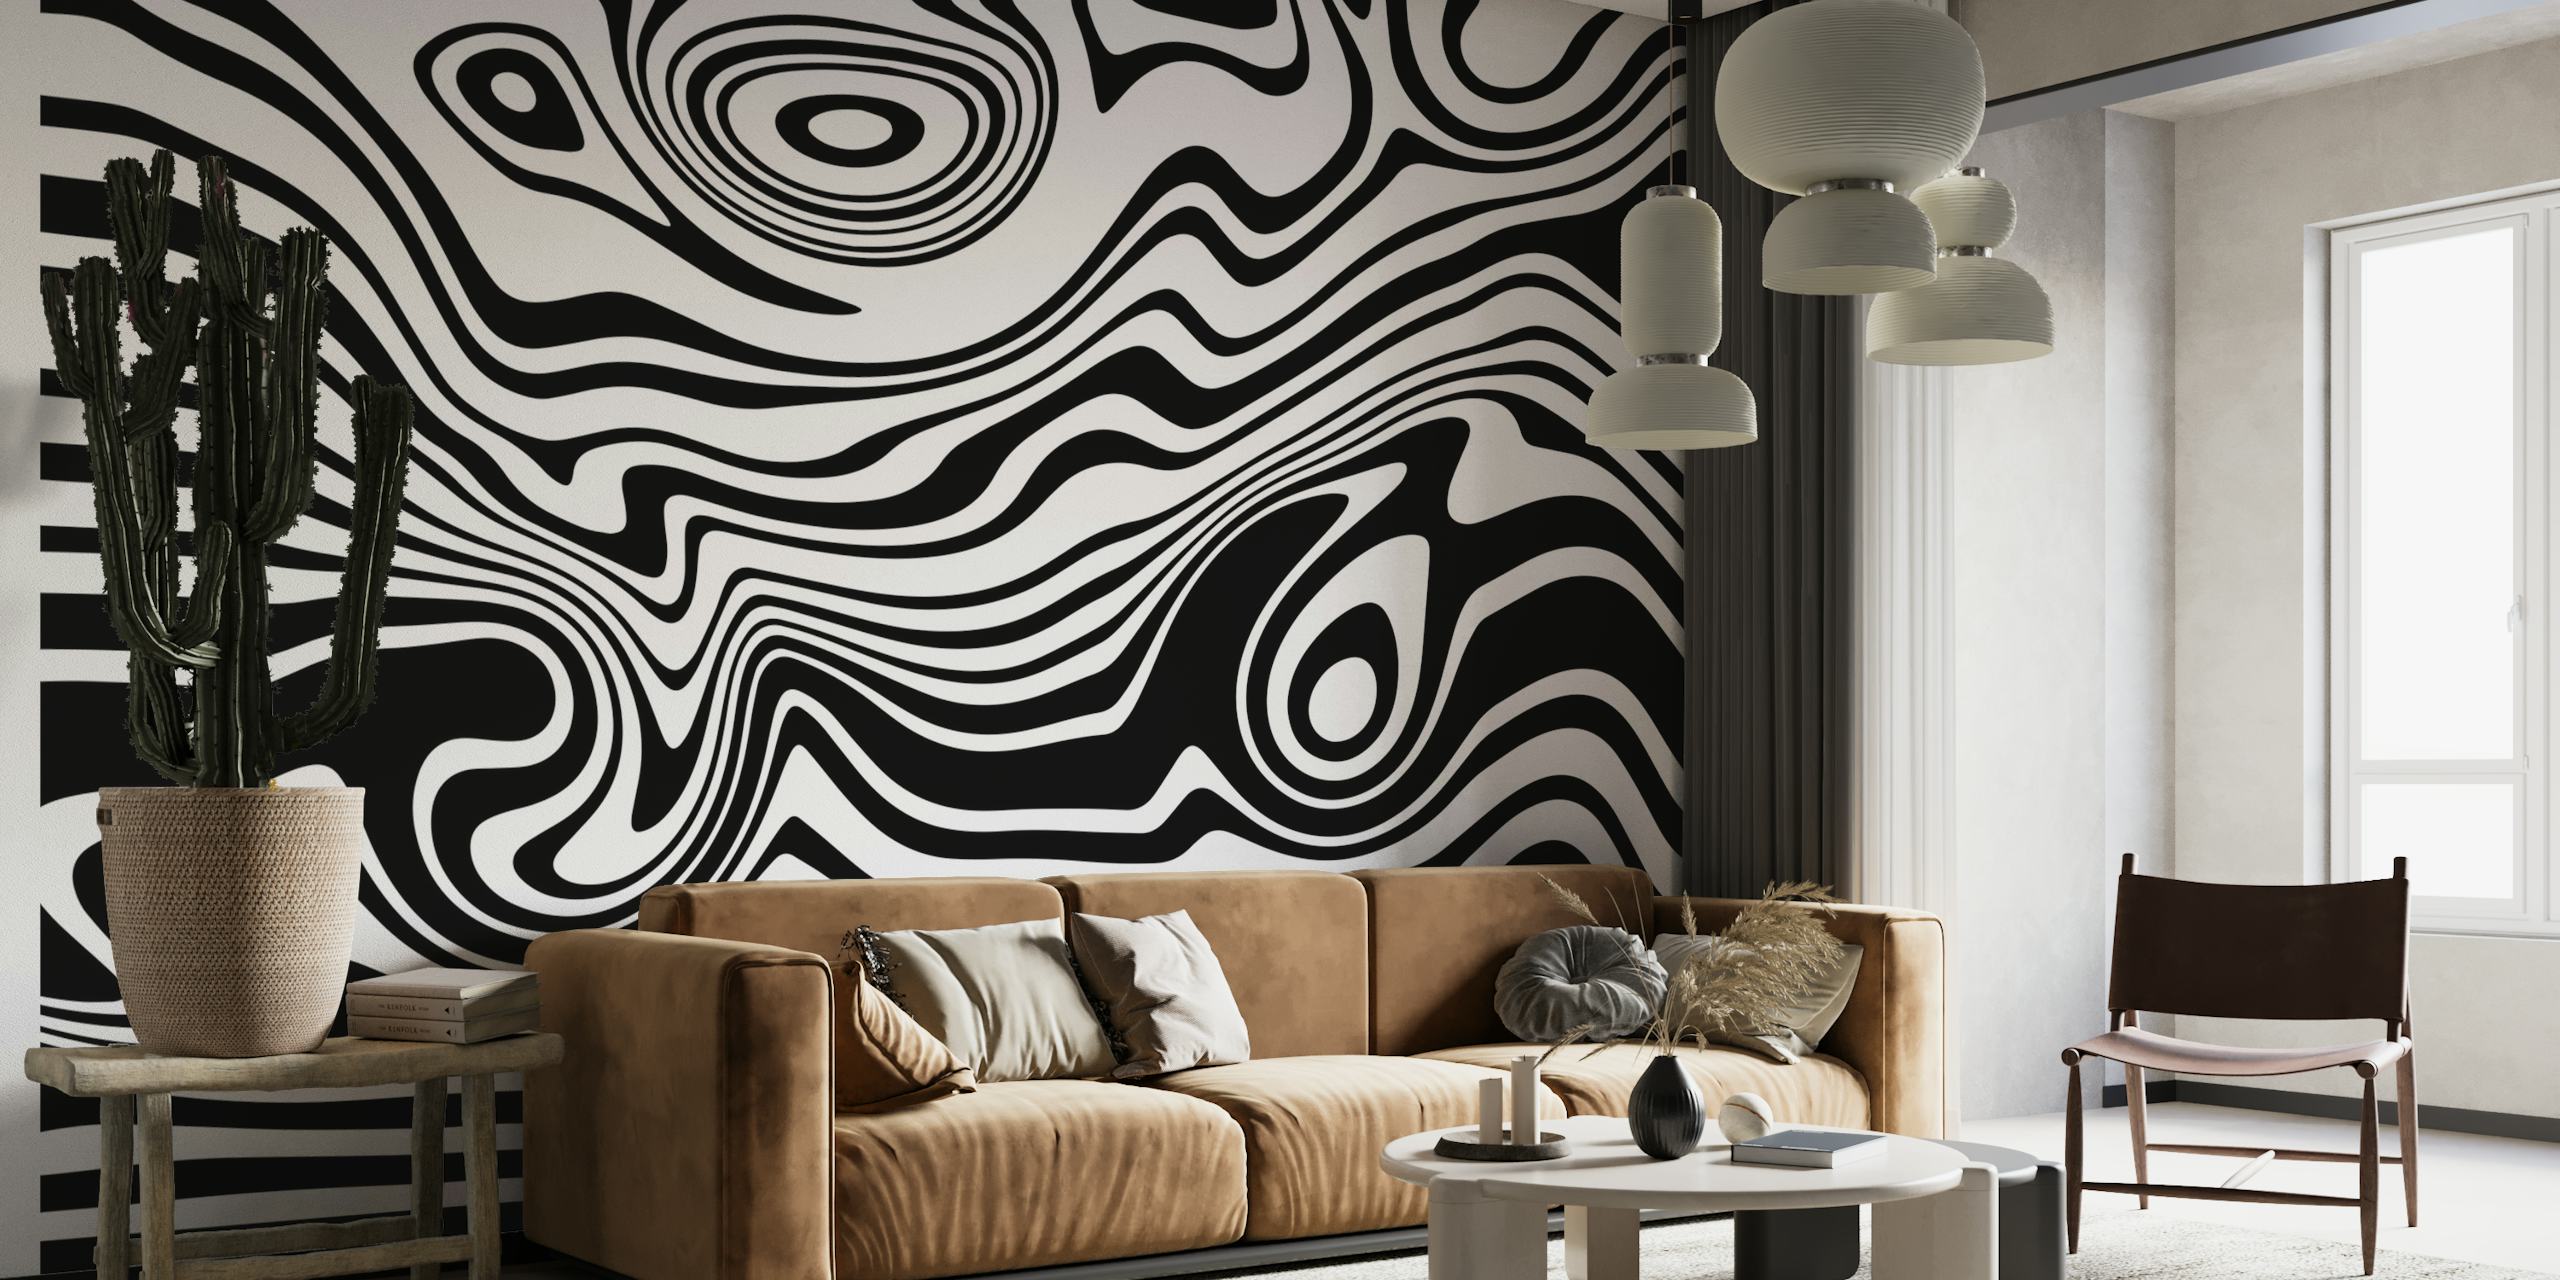 Black and white swirling marble pattern wall mural